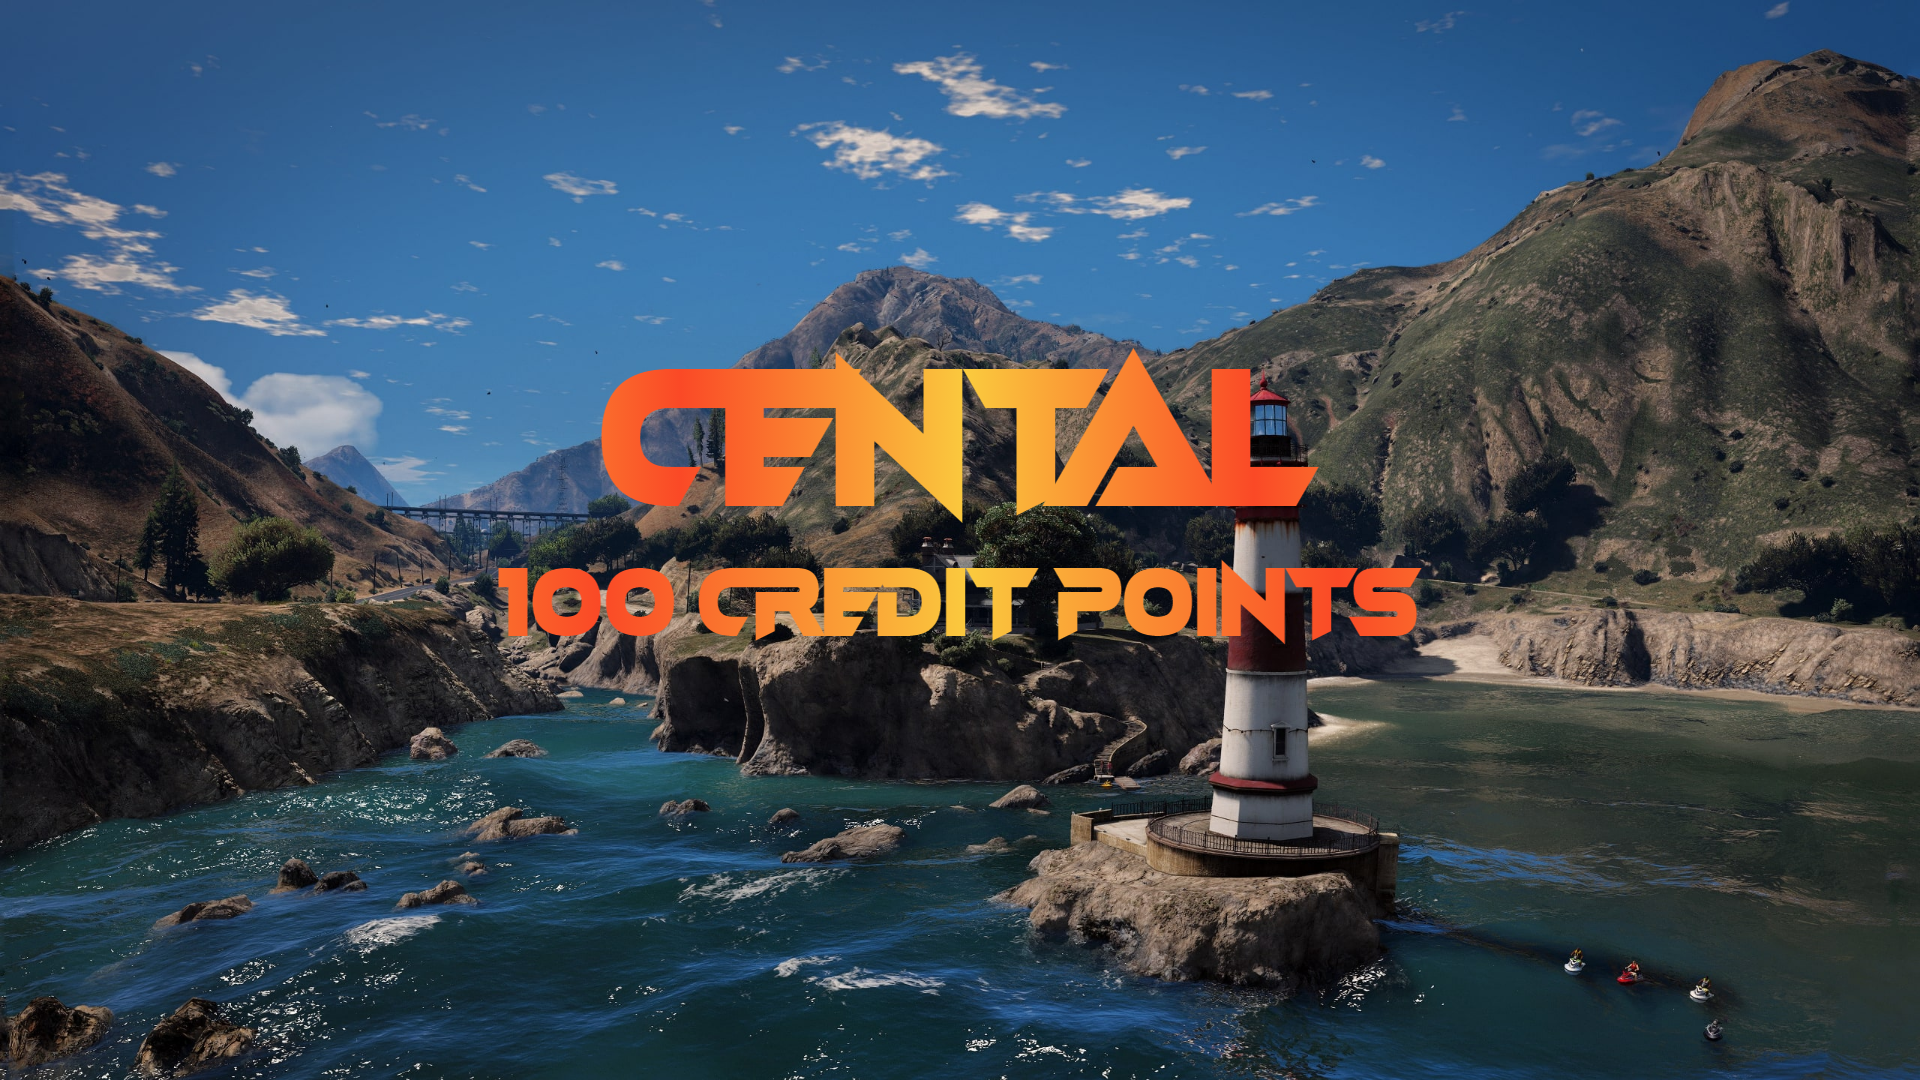 CentralRP - 100 Credit Points Gift Card (11.29$)